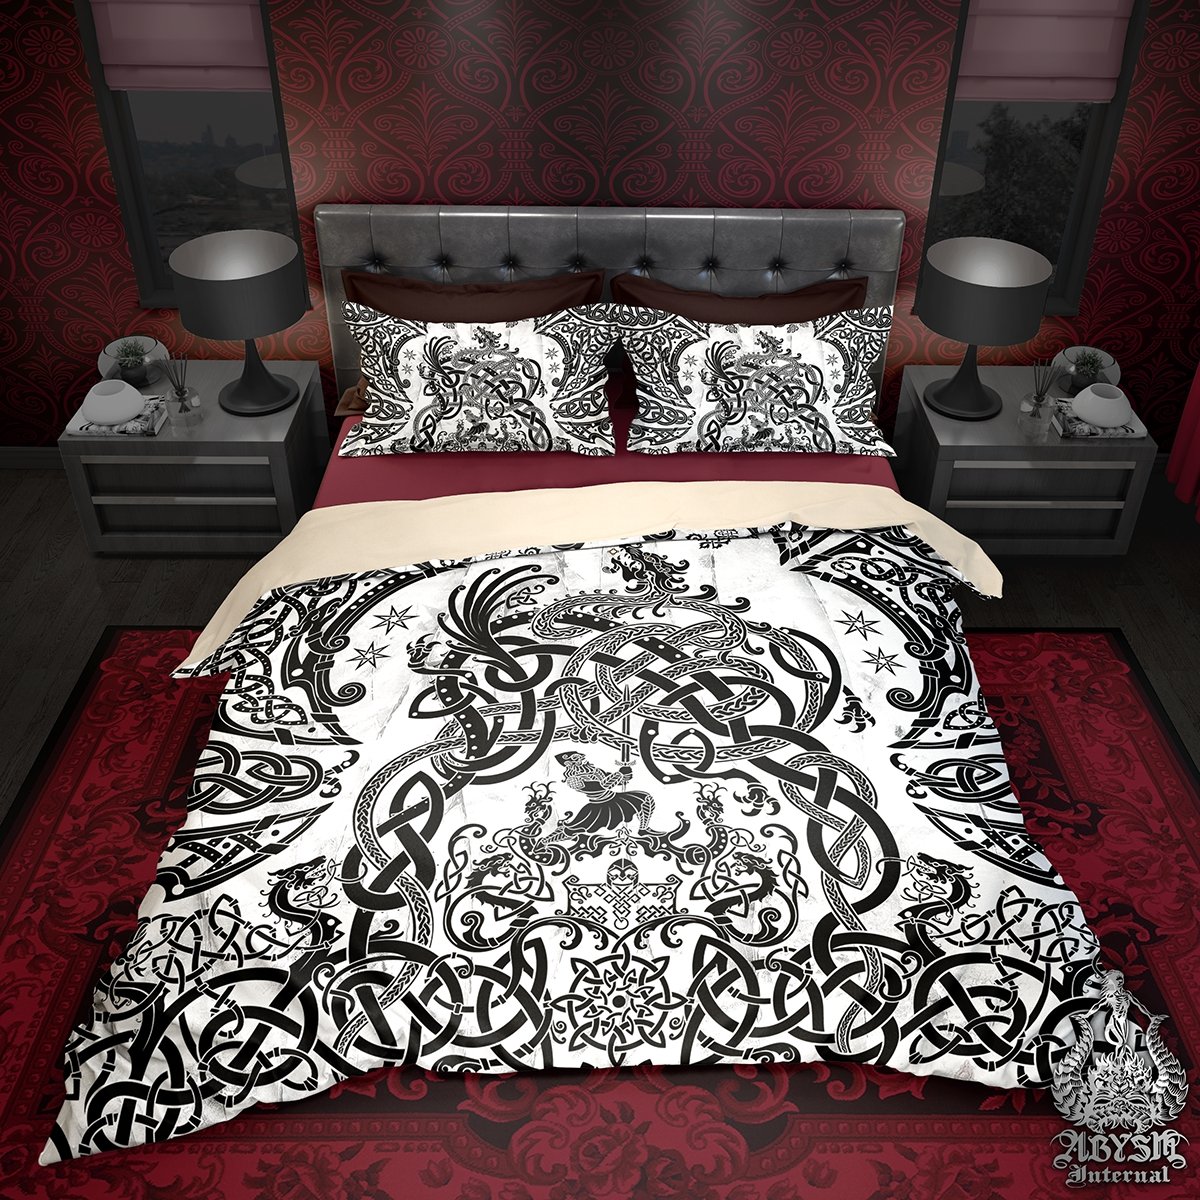 Viking Bedding Set, Comforter and Duvet, Norse Bed Cover and Bedroom Decor, Nordic Art, Sigurd kills Dragon Fafnir, King, Queen and Twin Size - Black & White - Abysm Internal